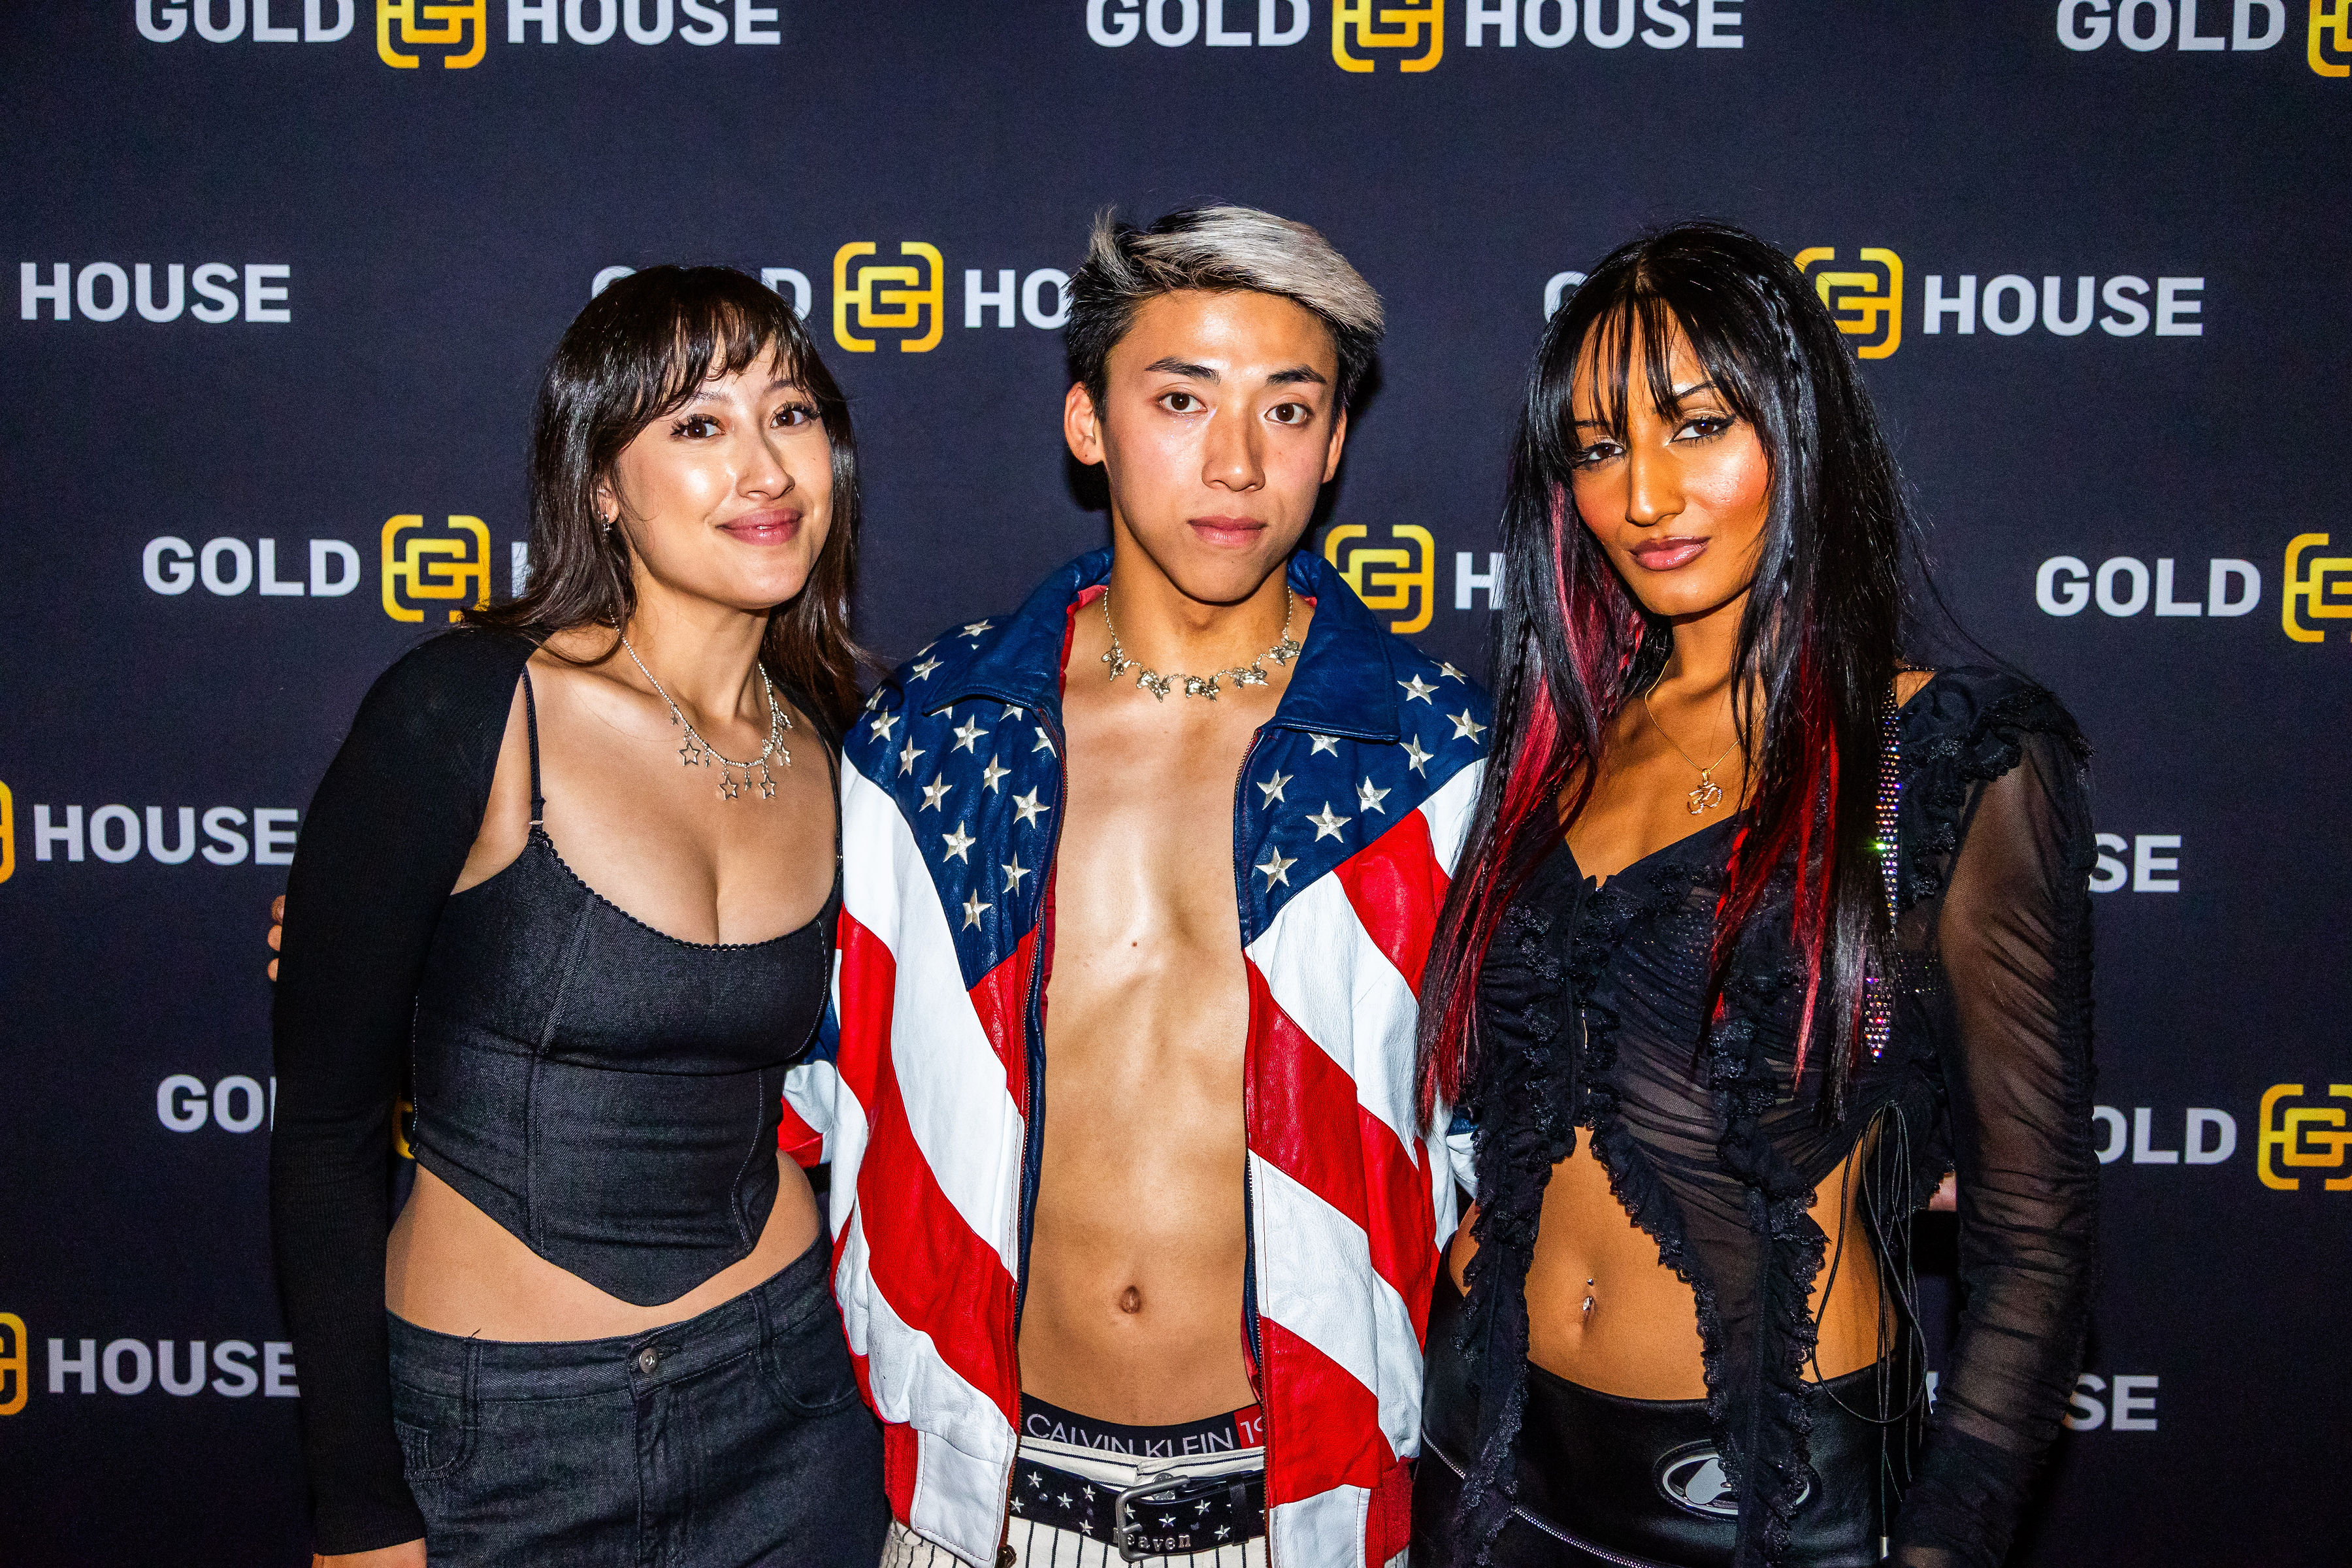 AEG Presents, Spotify and Gold House host Futures Showcase